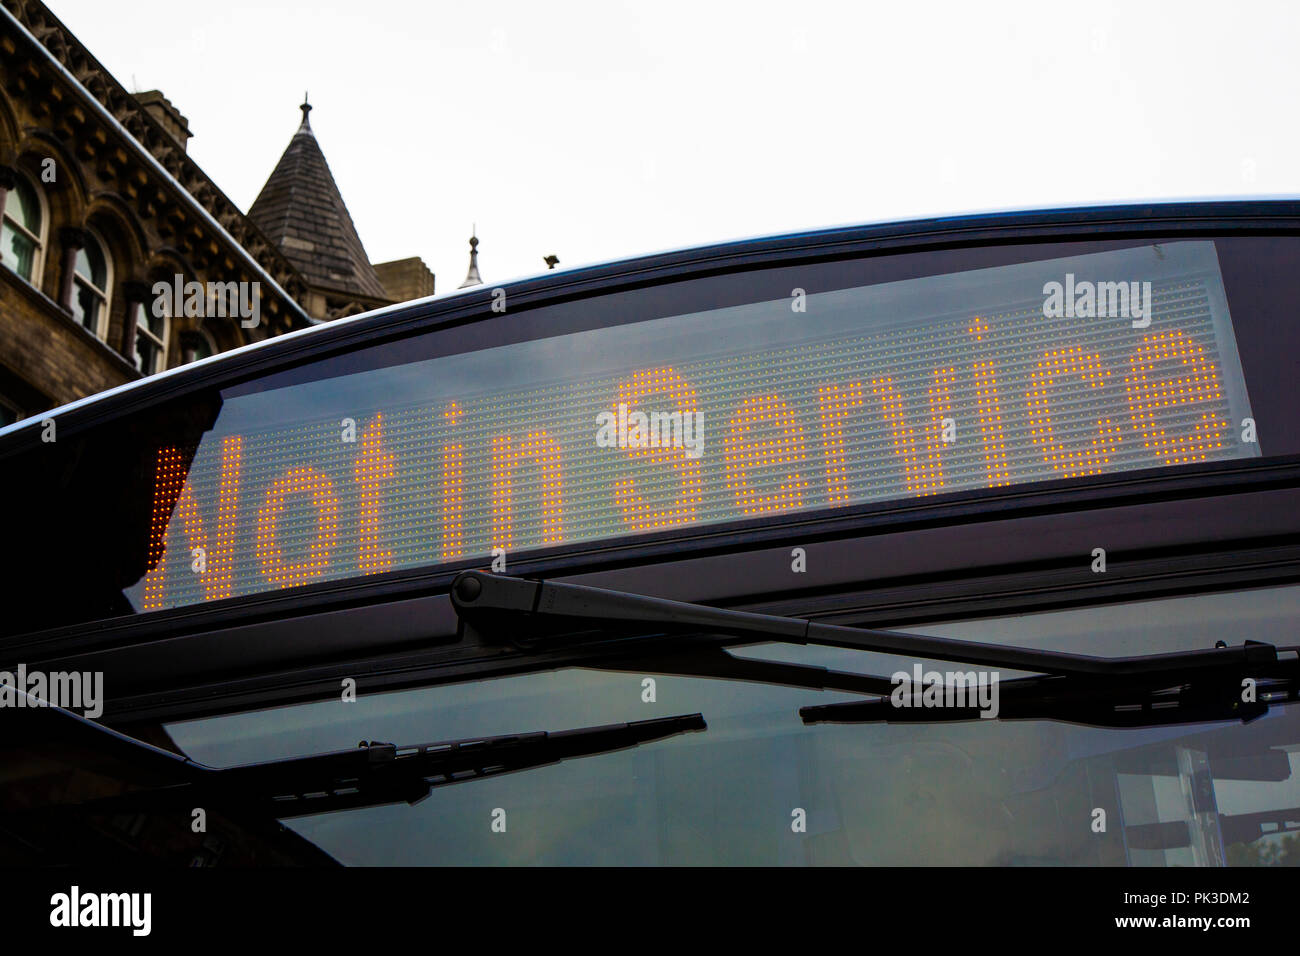 A Not in Service LED Destination Sign on a volvo single decker bus in Huddersfield, West Yorkshire, England Stock Photo